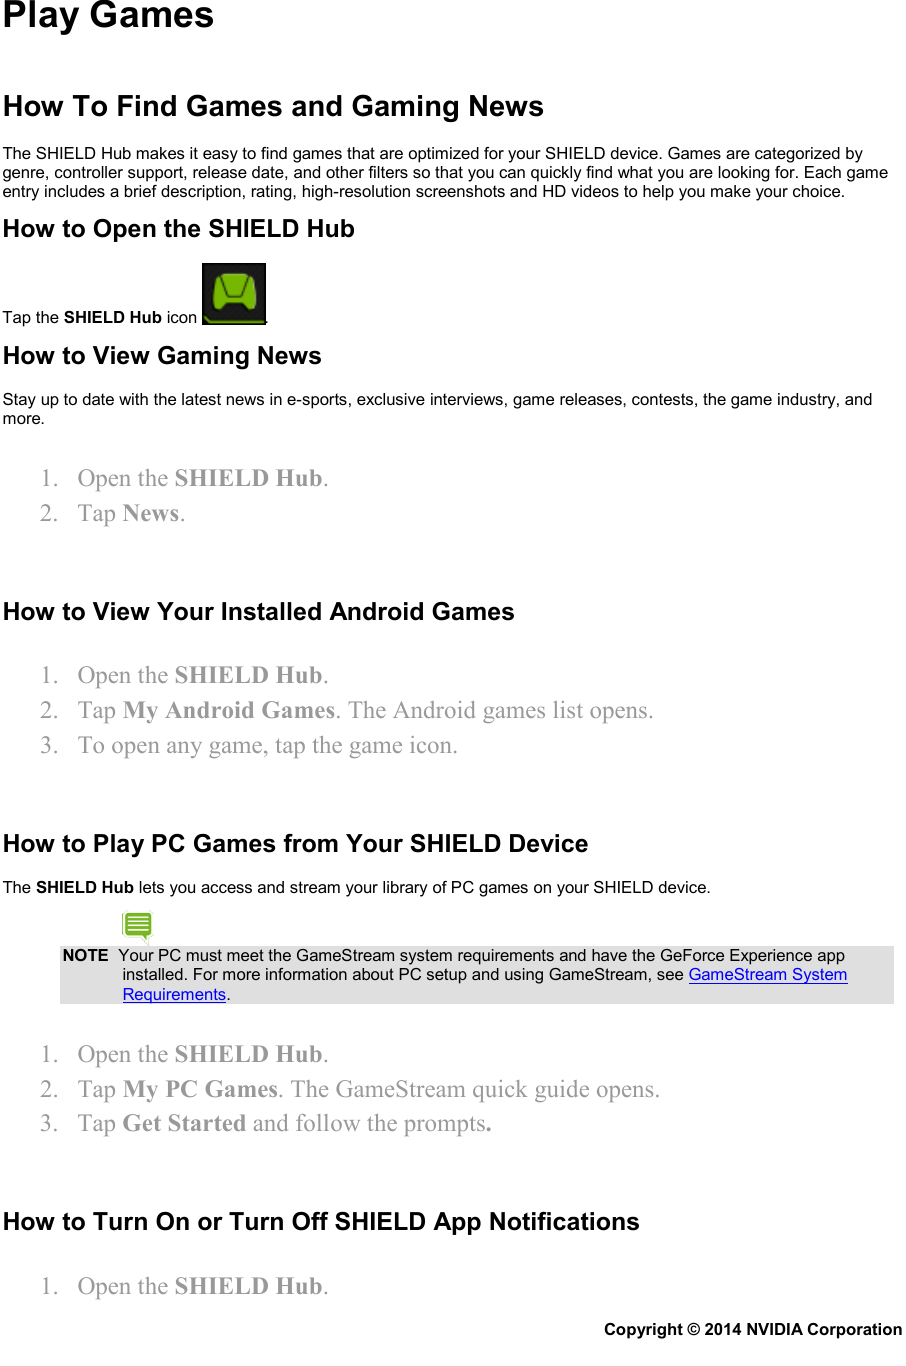 Play Games  How To Find Games and Gaming News  The SHIELD Hub makes it easy to find games that are optimized for your SHIELD device. Games are categorized by genre, controller support, release date, and other filters so that you can quickly find what you are looking for. Each game entry includes a brief description, rating, high-resolution screenshots and HD videos to help you make your choice. How to Open the SHIELD Hub Tap the SHIELD Hub icon  . How to View Gaming News Stay up to date with the latest news in e-sports, exclusive interviews, game releases, contests, the game industry, and more. 1. Open the SHIELD Hub. 2. Tap News.   How to View Your Installed Android Games 1. Open the SHIELD Hub. 2. Tap My Android Games. The Android games list opens. 3. To open any game, tap the game icon.   How to Play PC Games from Your SHIELD Device The SHIELD Hub lets you access and stream your library of PC games on your SHIELD device. NOTE  Your PC must meet the GameStream system requirements and have the GeForce Experience app installed. For more information about PC setup and using GameStream, see GameStream System Requirements. 1. Open the SHIELD Hub. 2. Tap My PC Games. The GameStream quick guide opens. 3. Tap Get Started and follow the prompts.   How to Turn On or Turn Off SHIELD App Notifications 1. Open the SHIELD Hub. Copyright © 2014 NVIDIA Corporation   